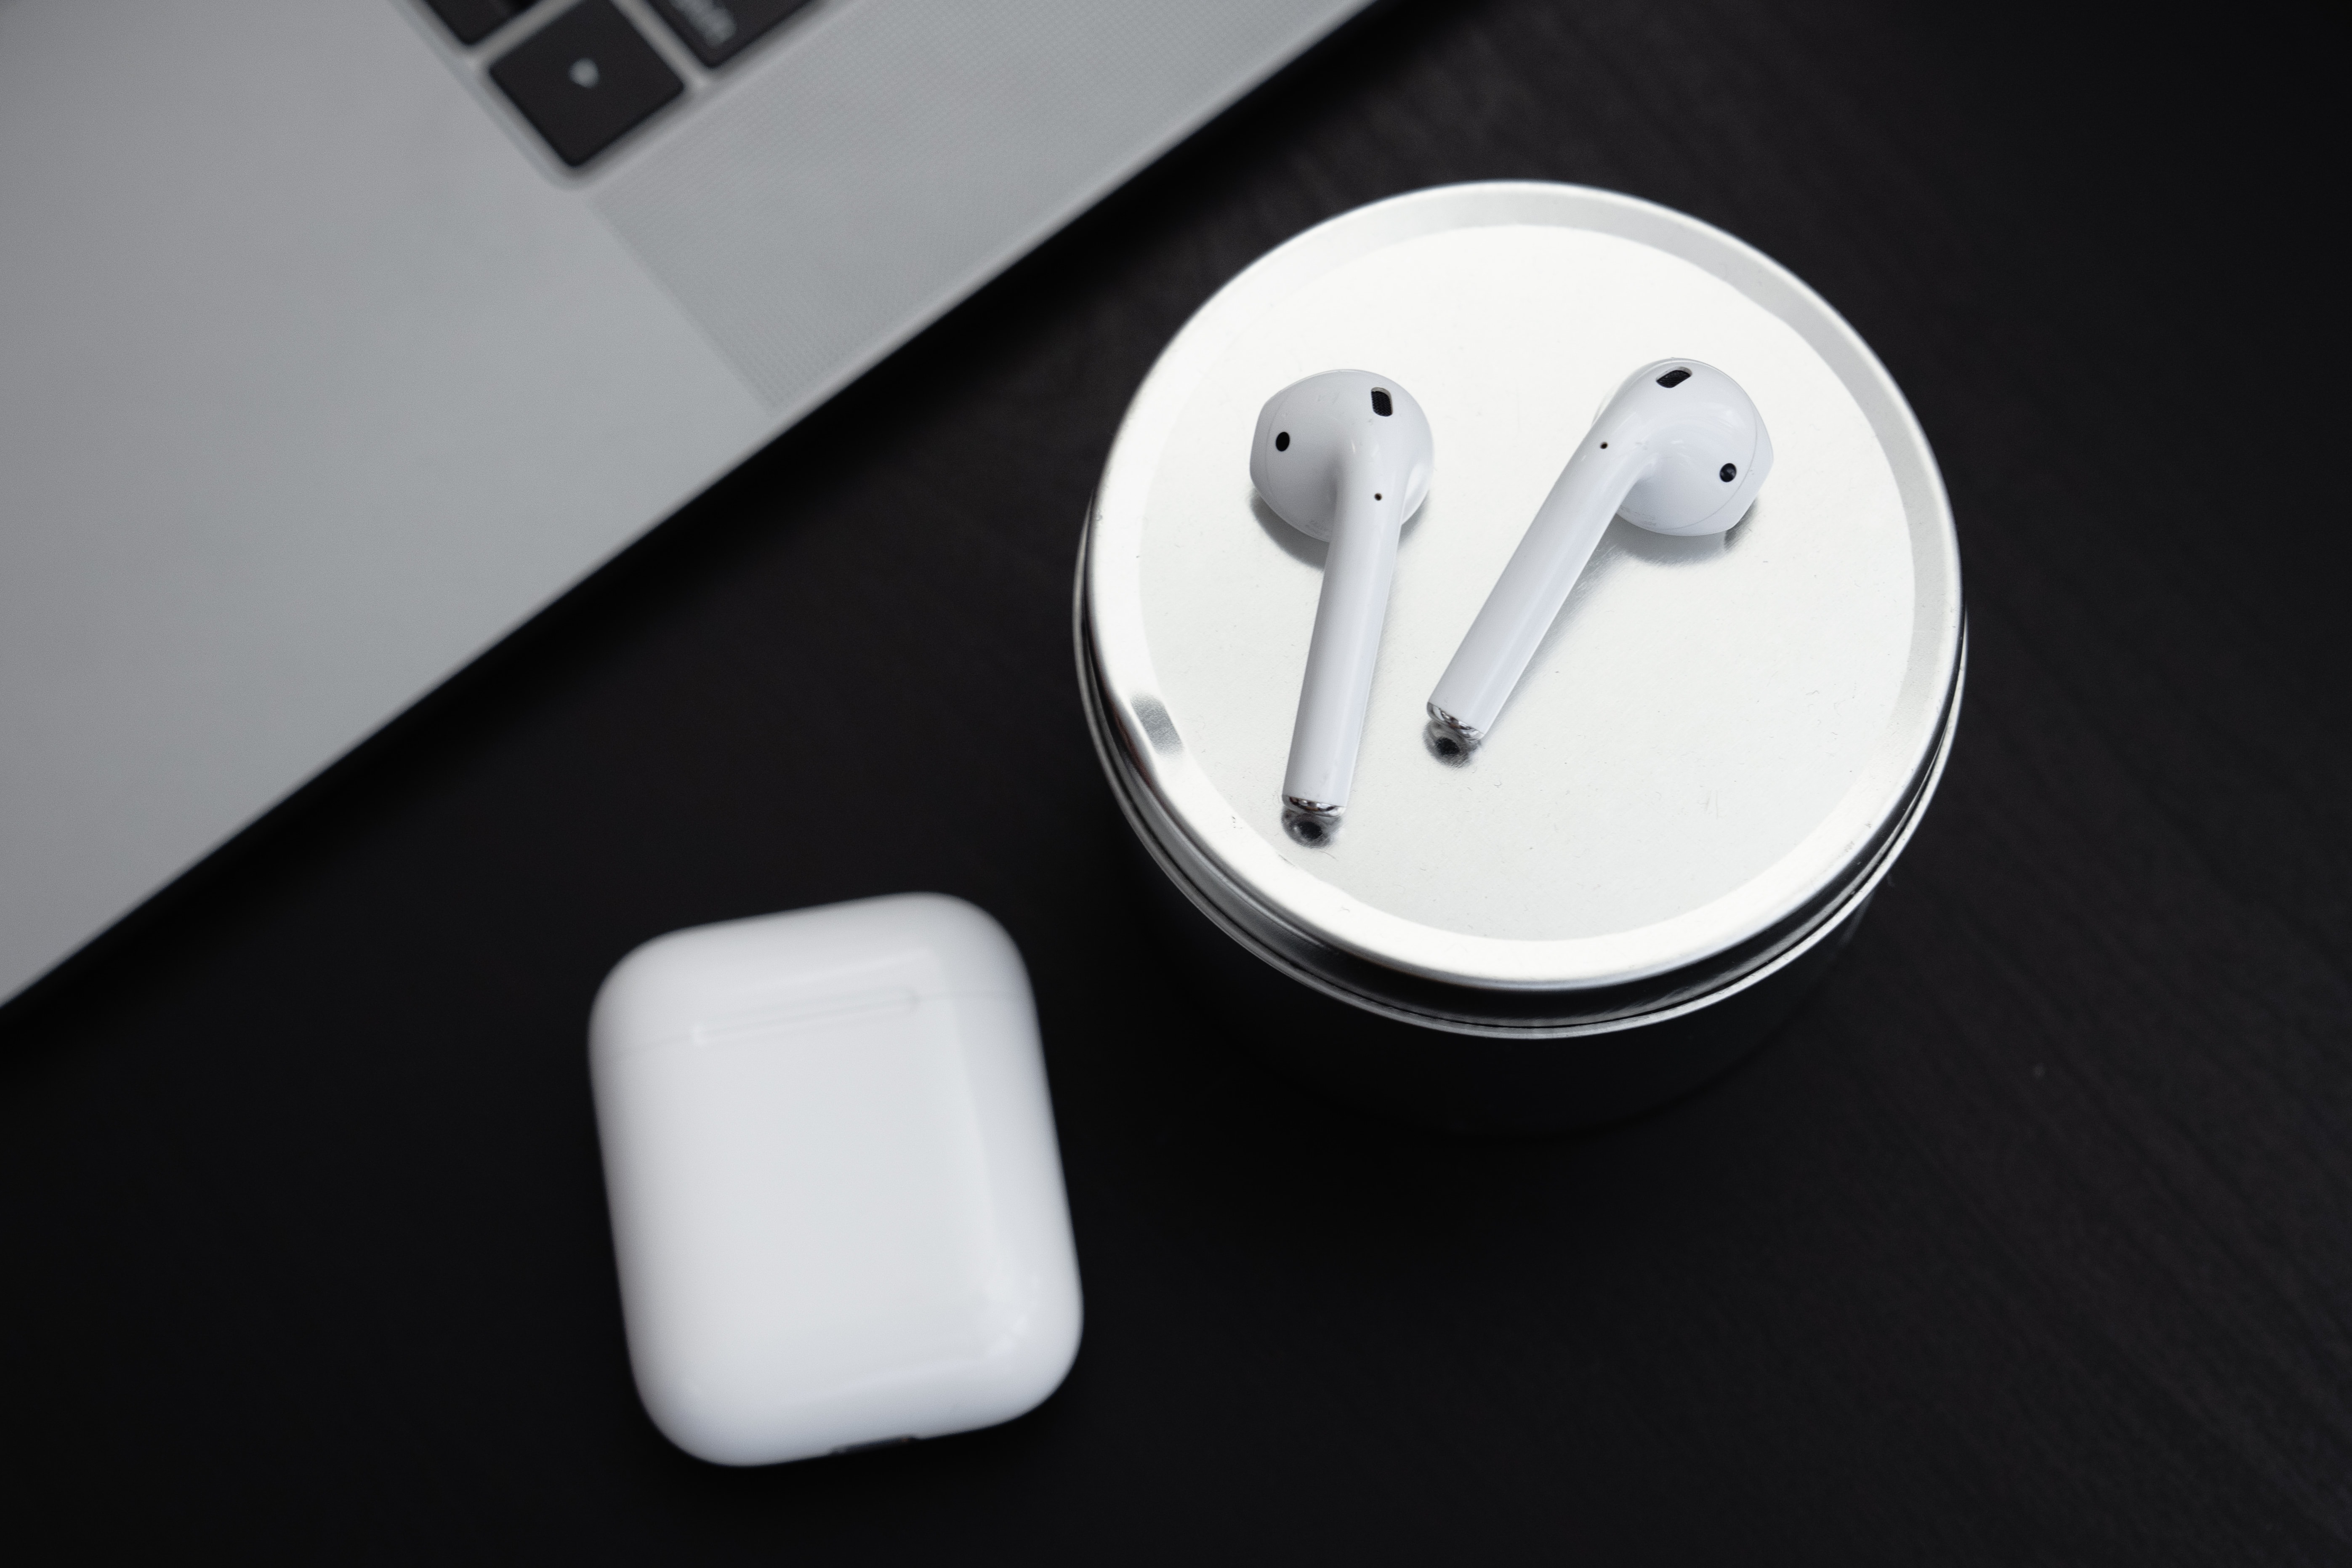 Samsung Debuts $100 Galaxy Buds FE Noise-Canceling Earbuds - CNET